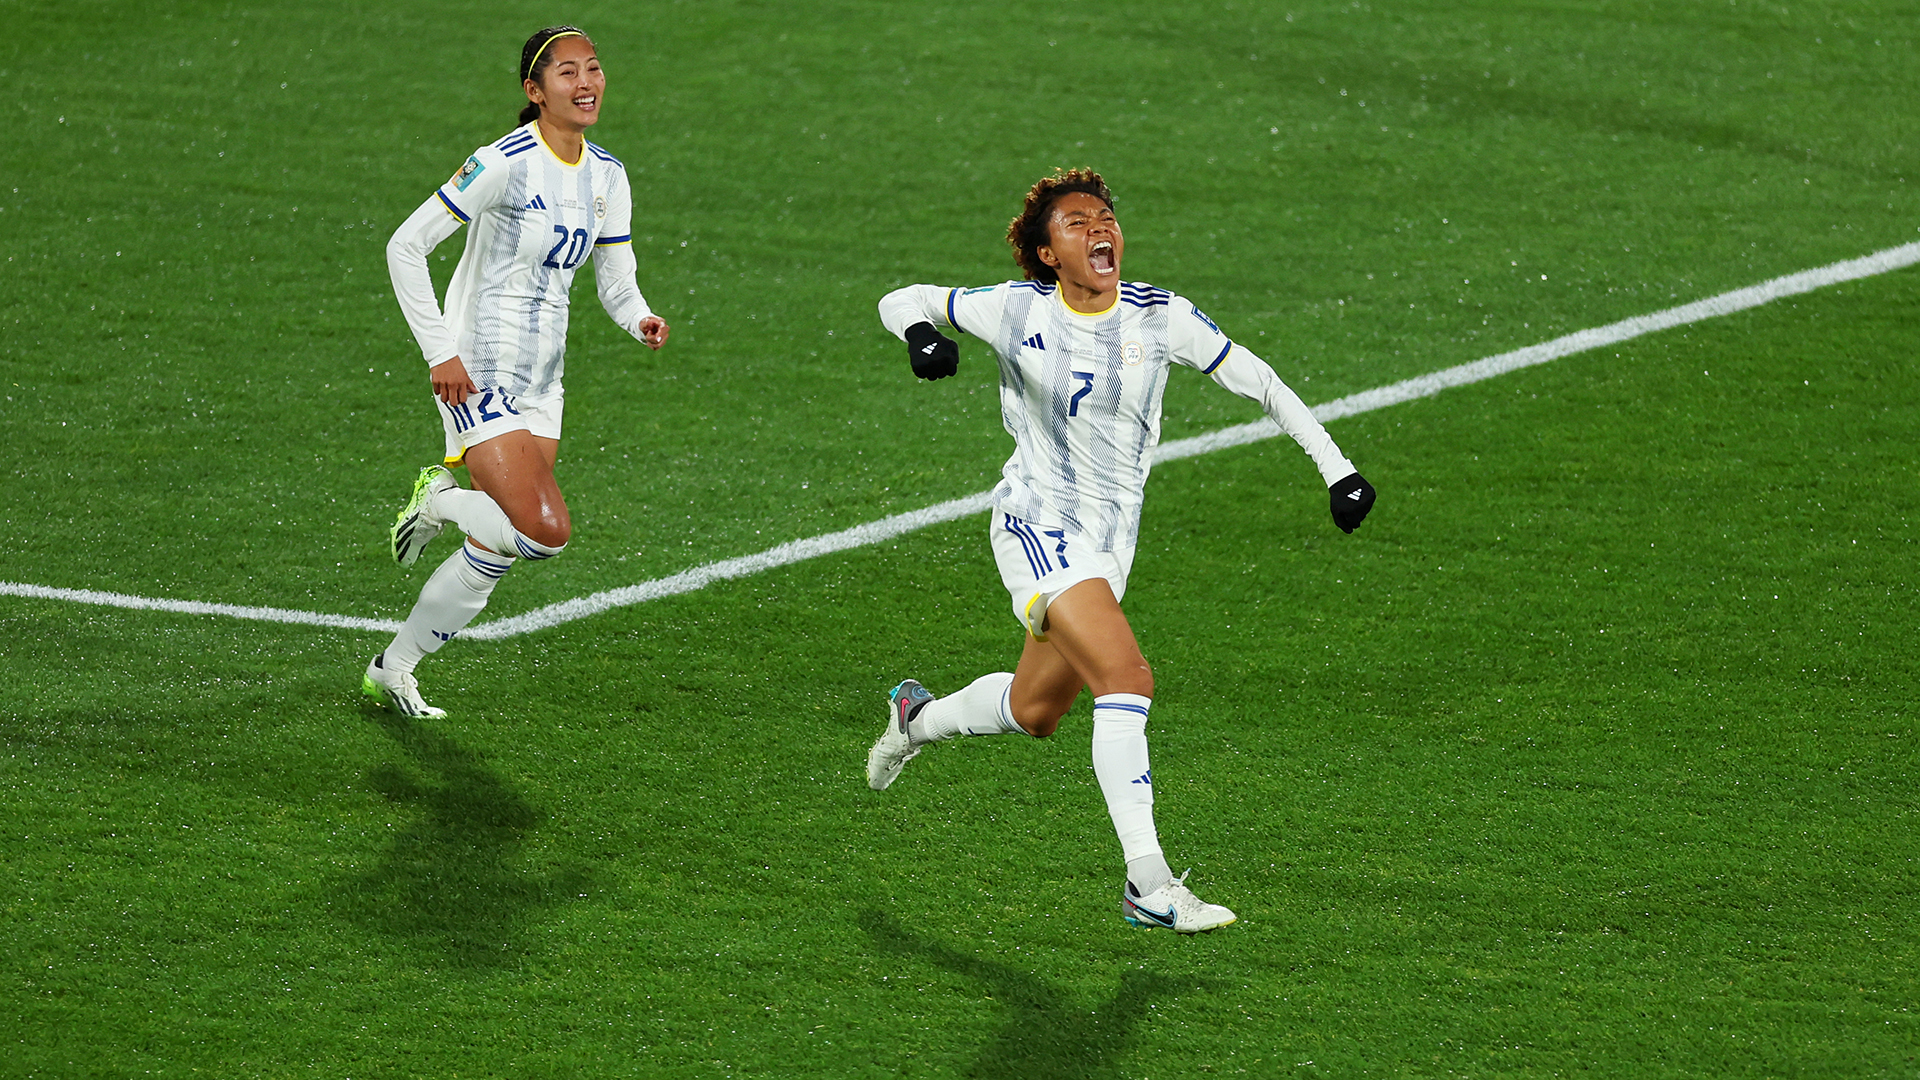 Sarina Bolden (R) of Philippines celebrates after scoring her team's first goal during the FIFA Women's World Cup Australia &amp; New Zealand 2023 Group A match between New Zealand and Philippines at Wellington Regional Stadium on July 25, 2023 in Wellington, New Zealand.